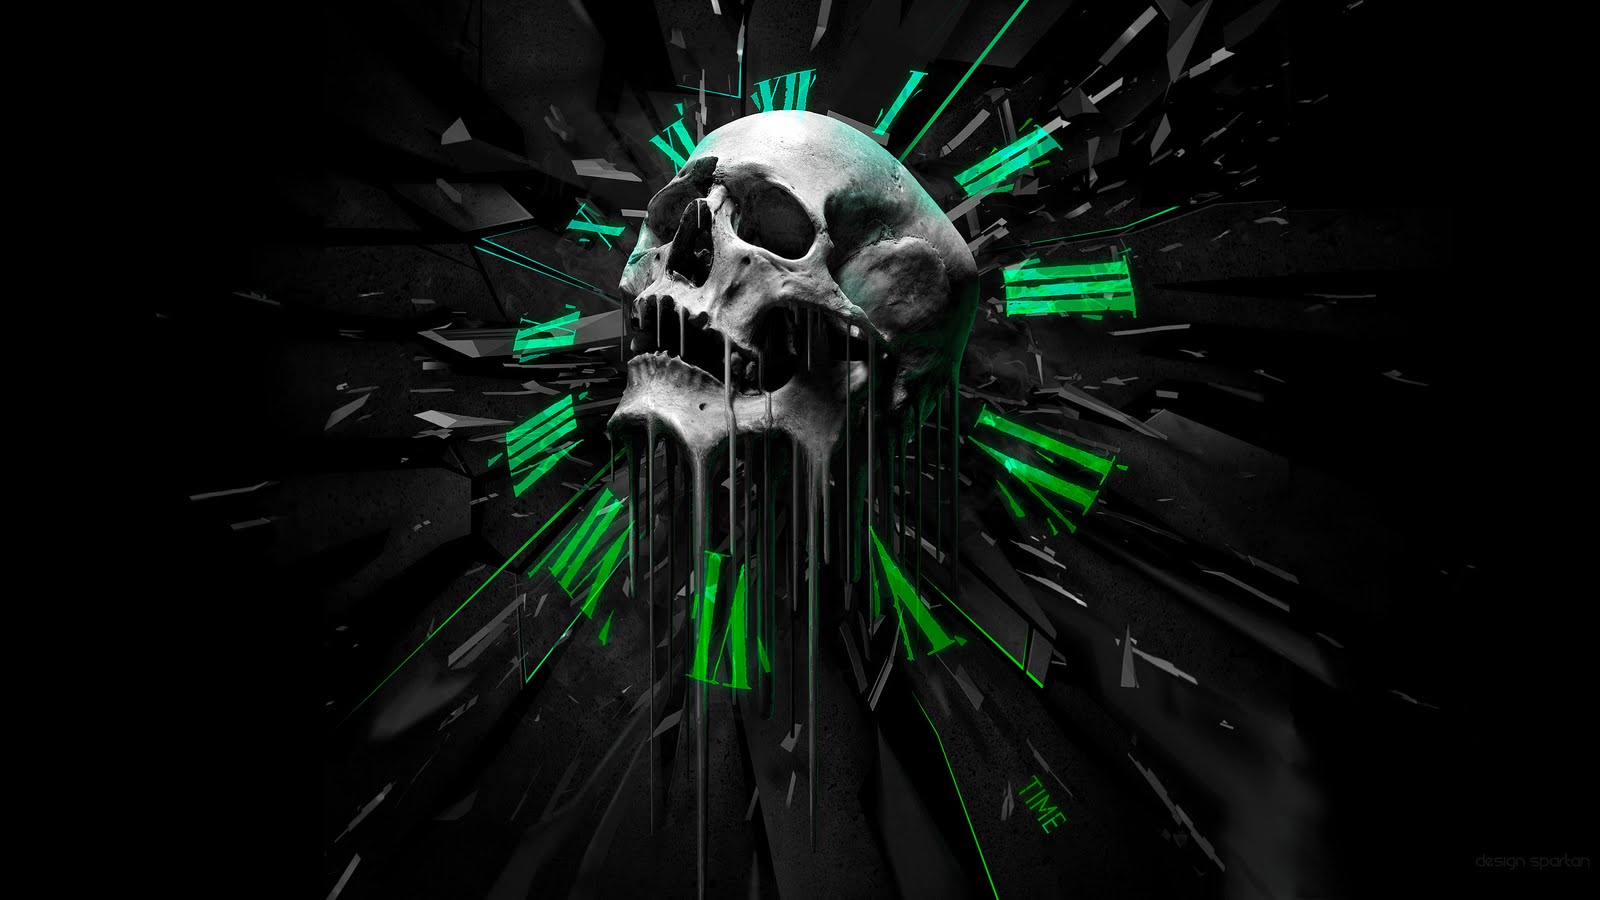 Epic-hd-wallpapers-of-skulls | Chainimage